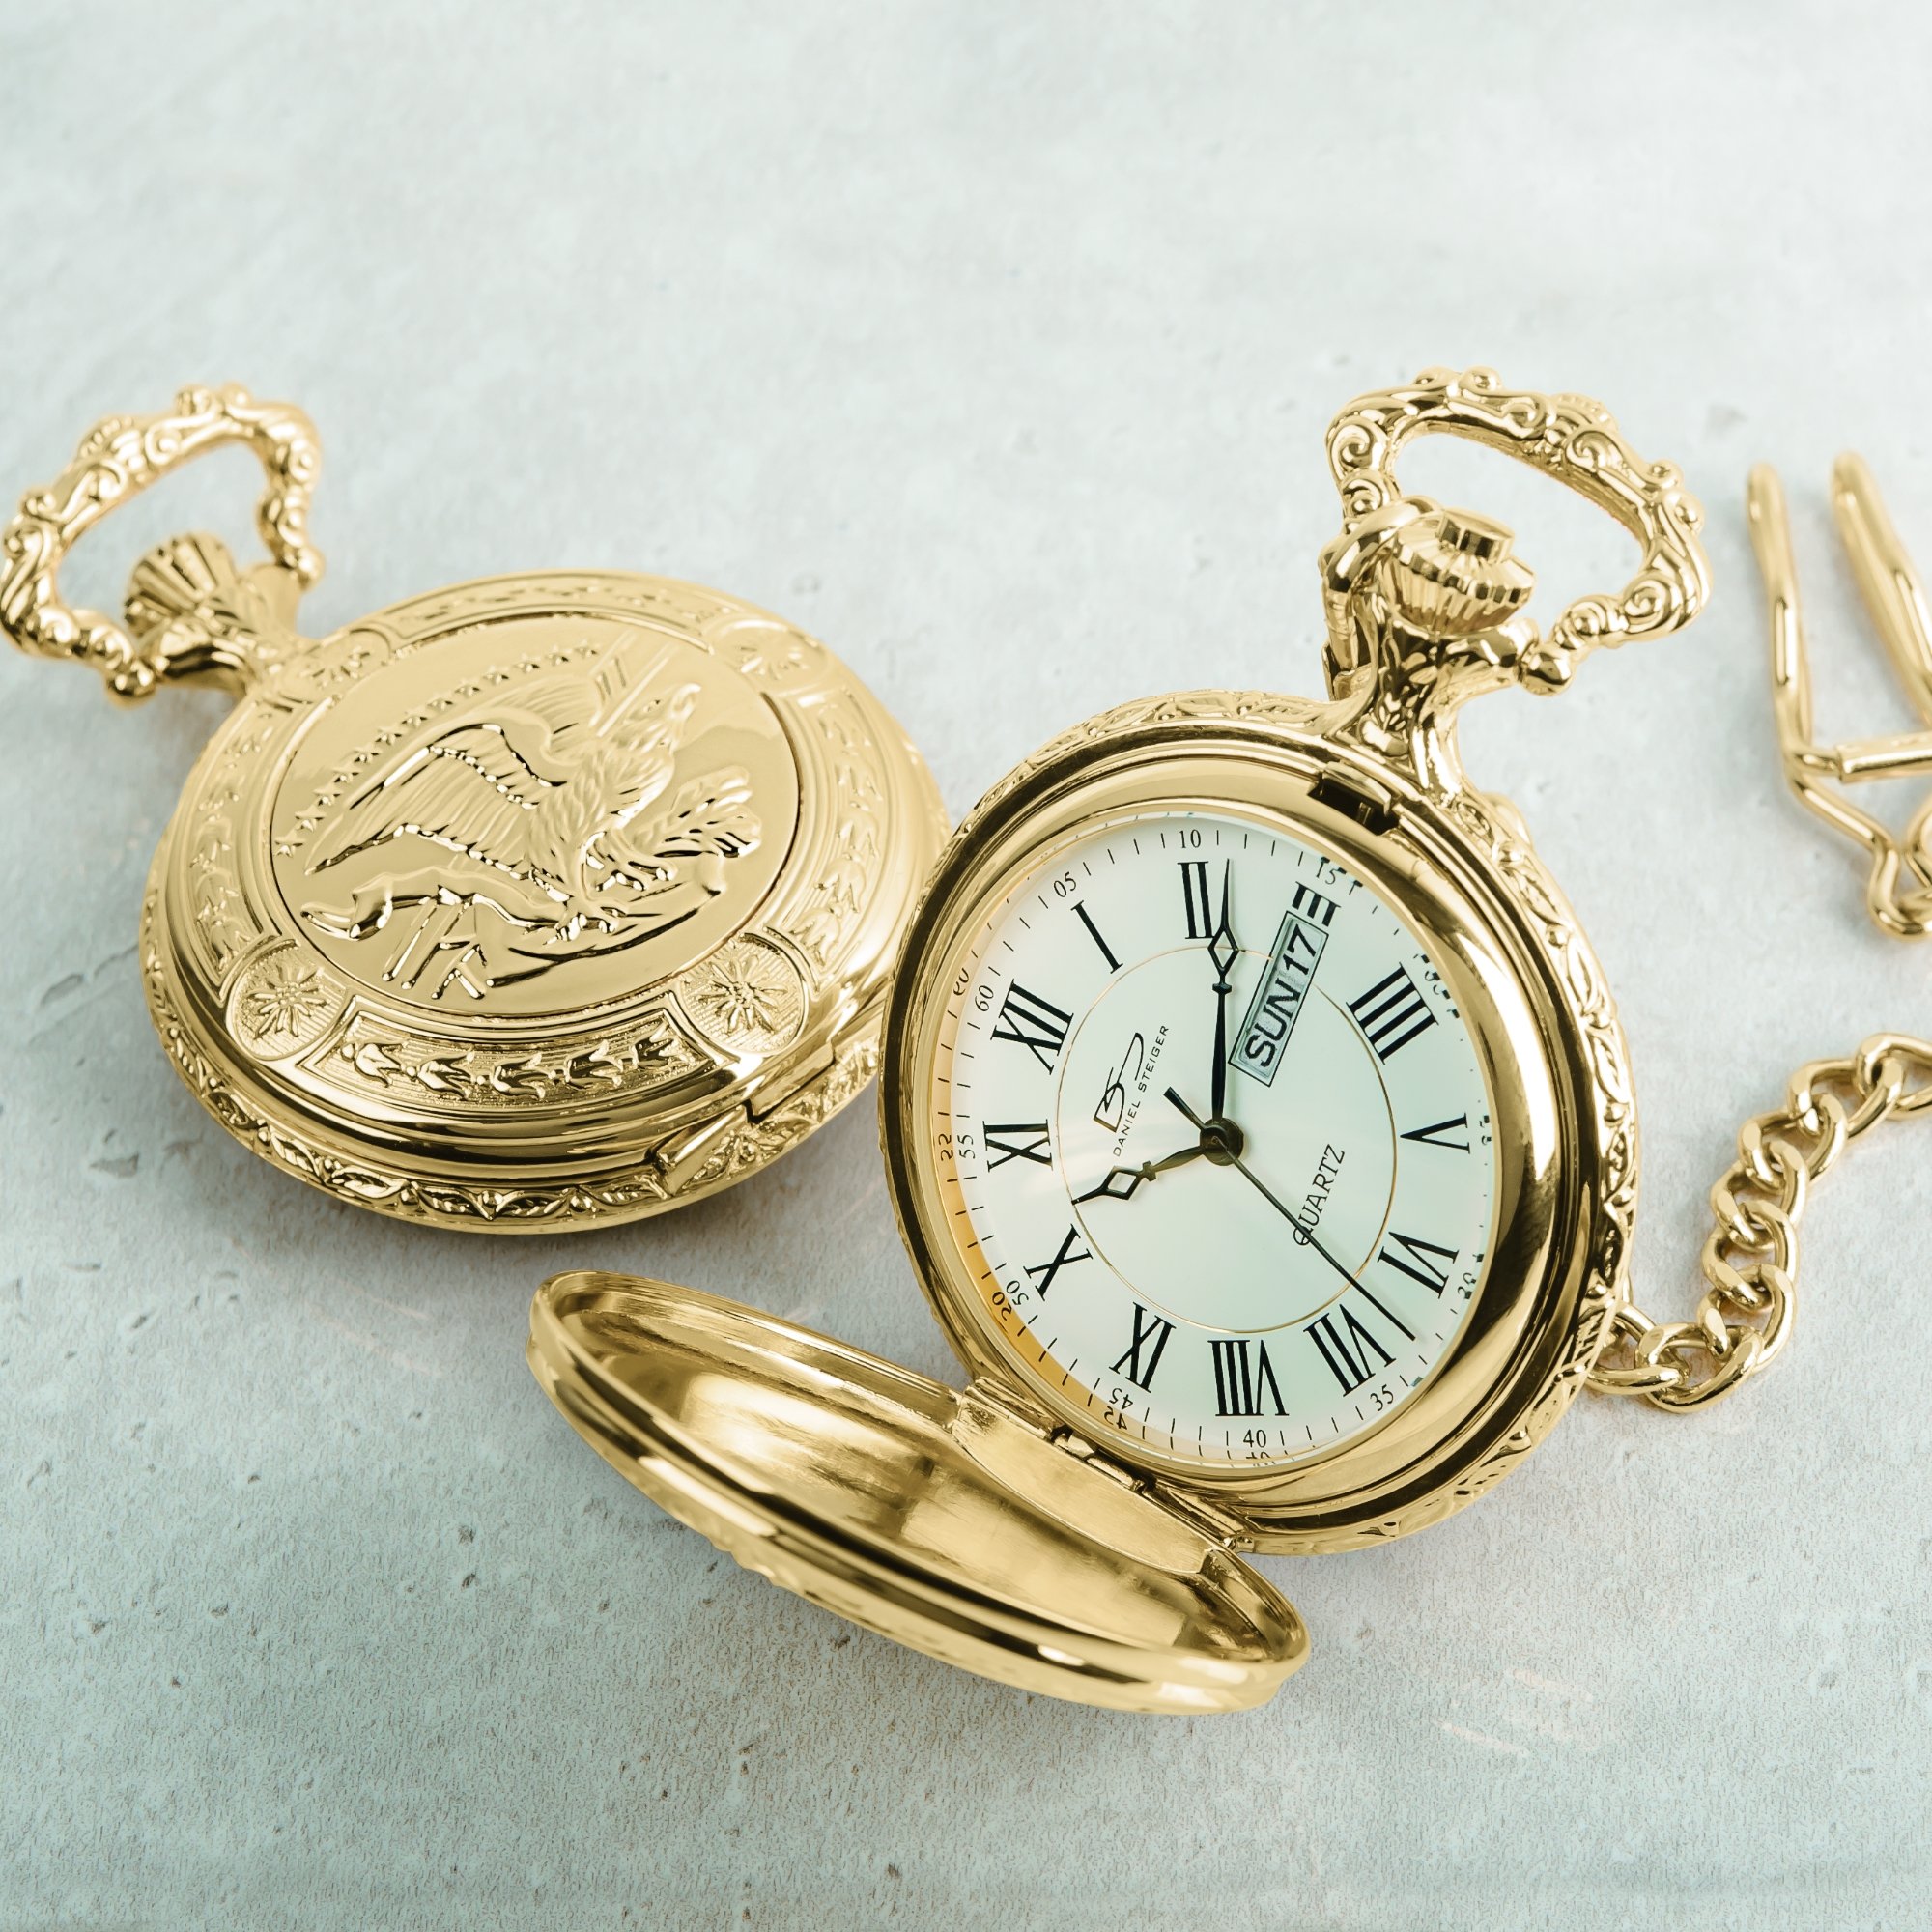 Daniel Steiger Flying Eagle Luxury Vintage Hunter Pocket Watch with Chain - Hand-Made Hunter Pocket Watch - 18k Gold Finish - Engraved Flying Eagle Design - White Dial with Black Roman Numerals